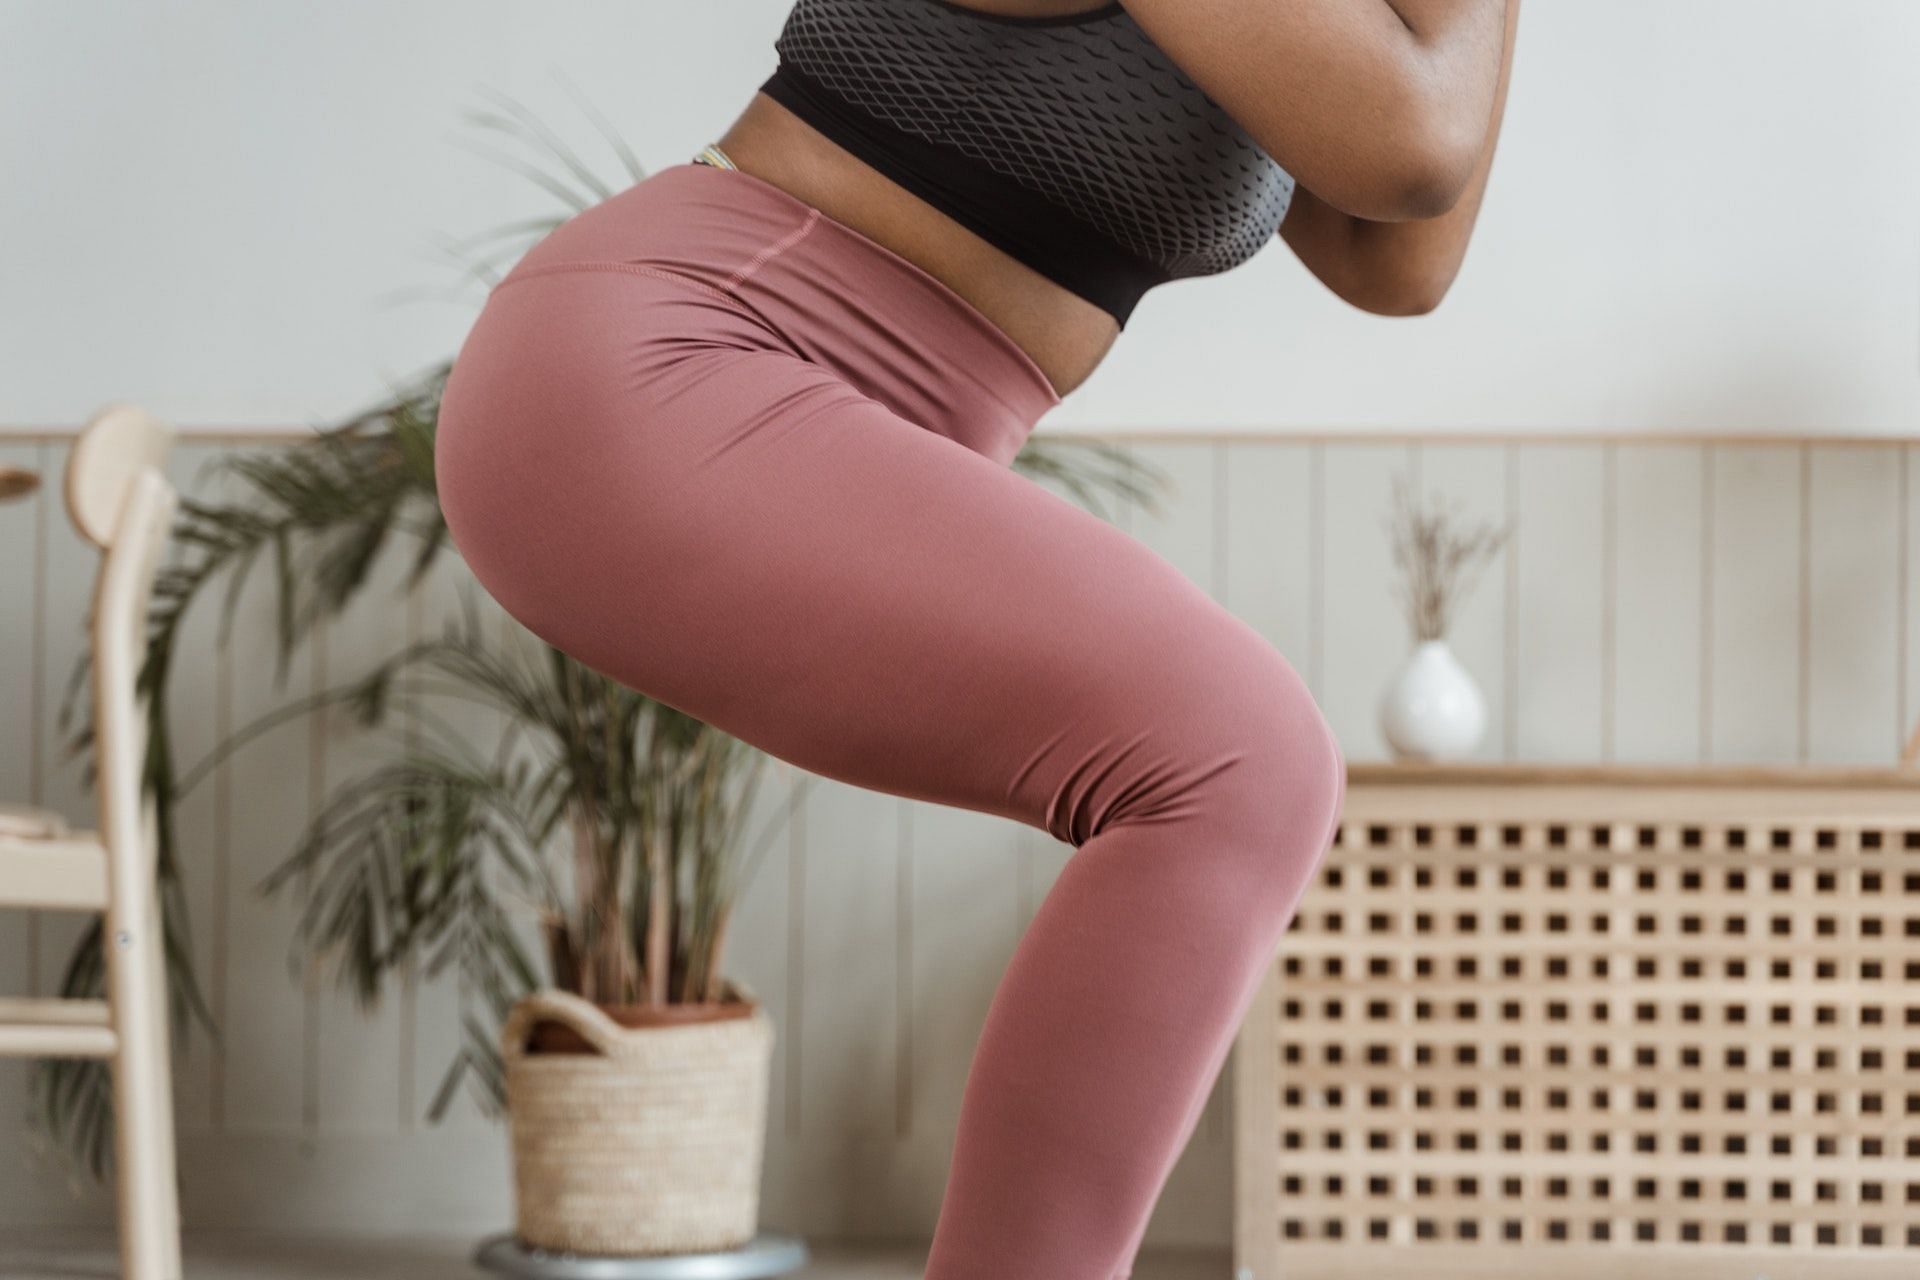 This squat variation targets the entire lower body. (Photo via Pexels/MART PRODUCTION)